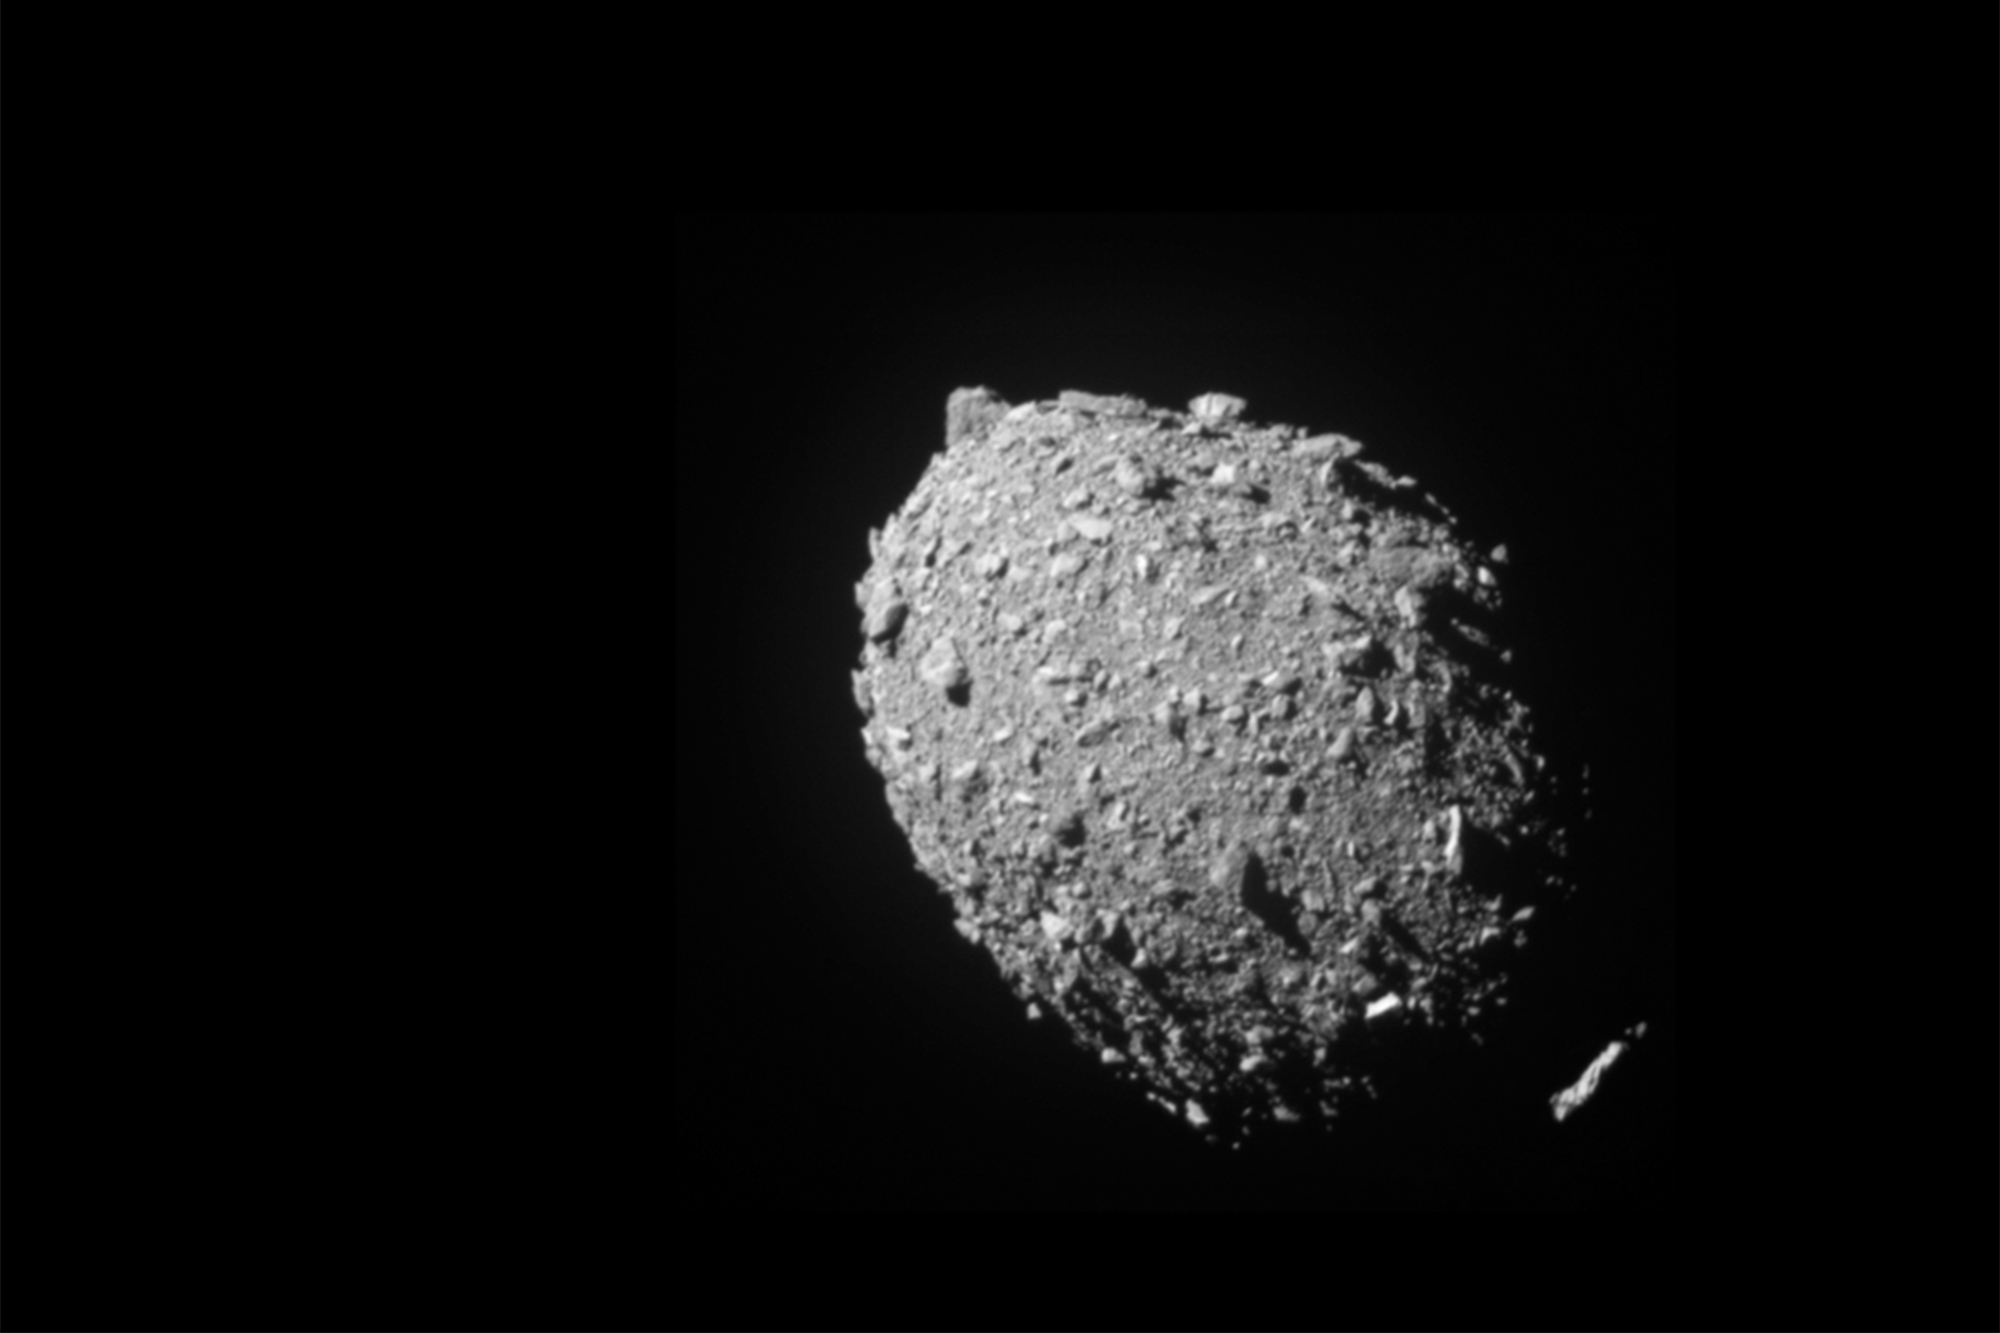 A rocky, egg shaped asteroid floating in space